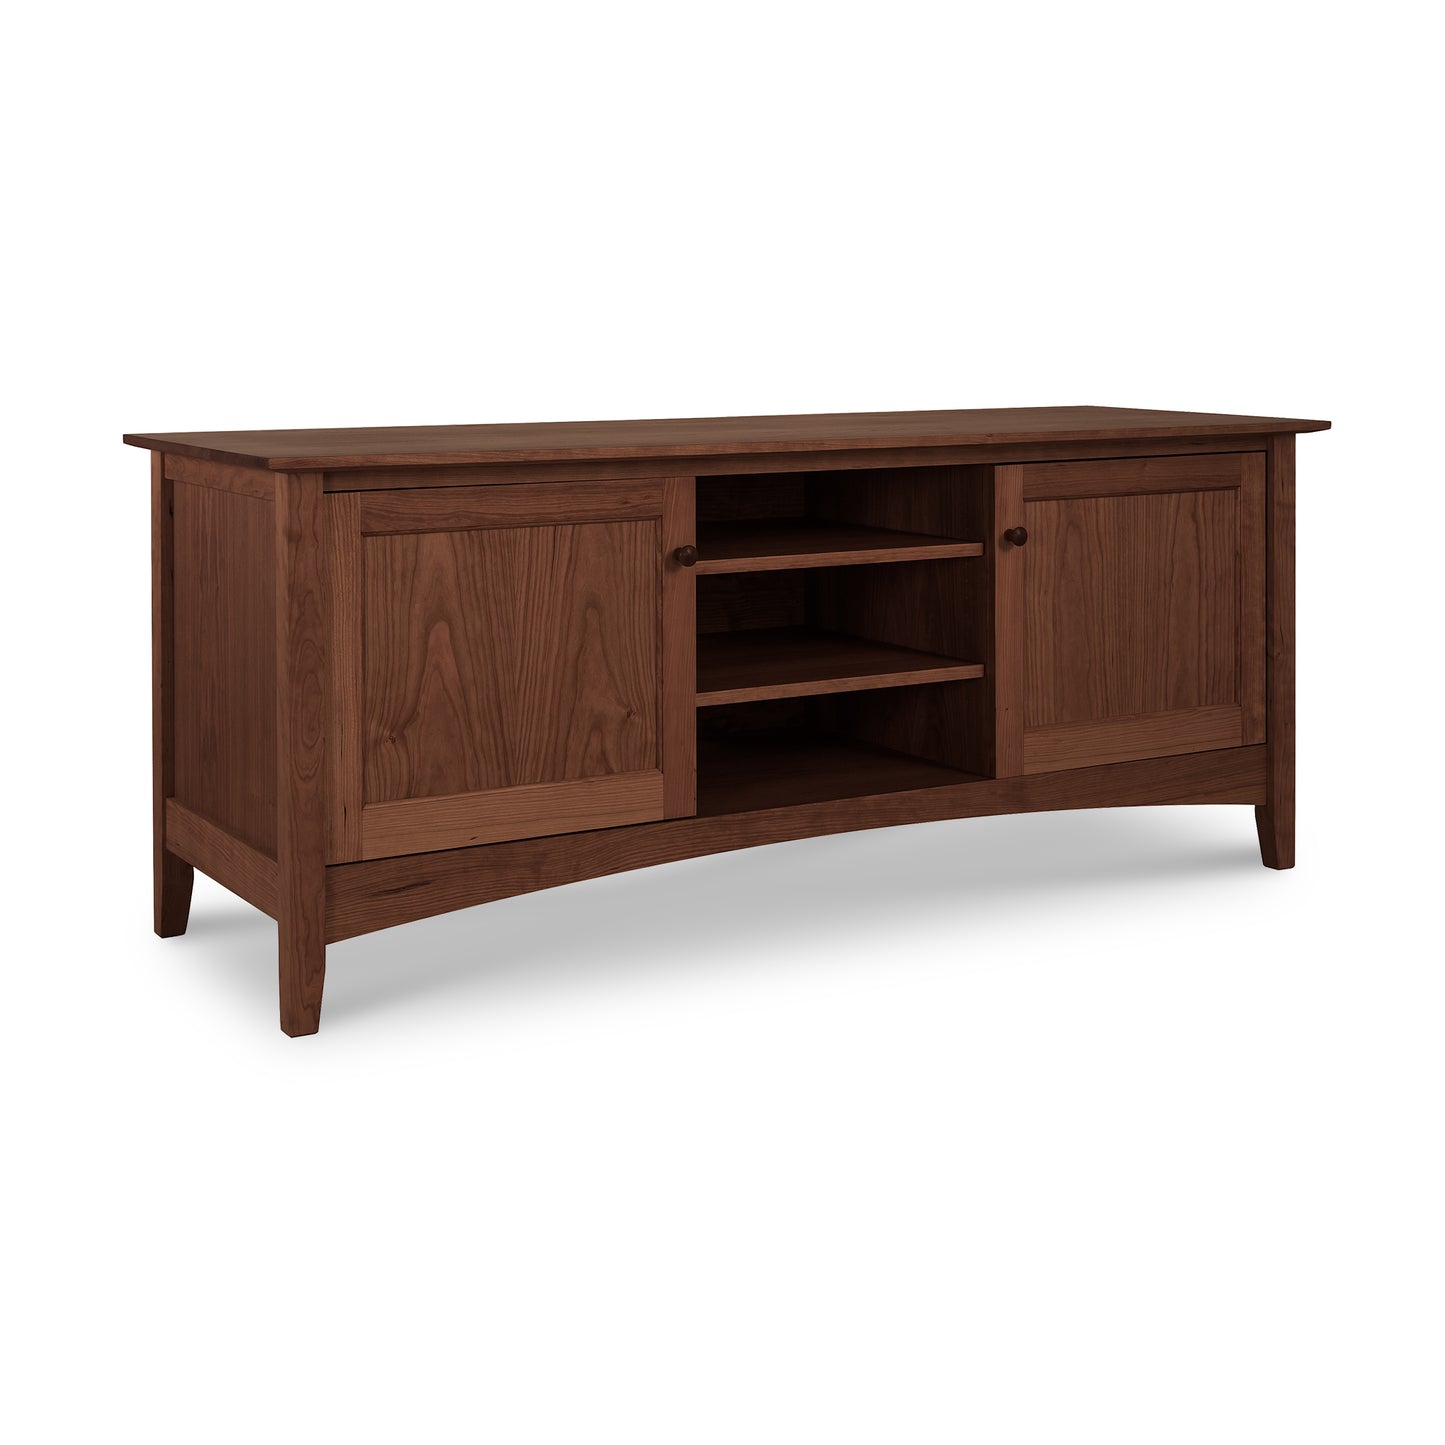 An American Shaker 67" TV Stand by Maple Corner Woodworks made of solid hardwoods, with two closed side cabinets and open center shelves, against a white background.